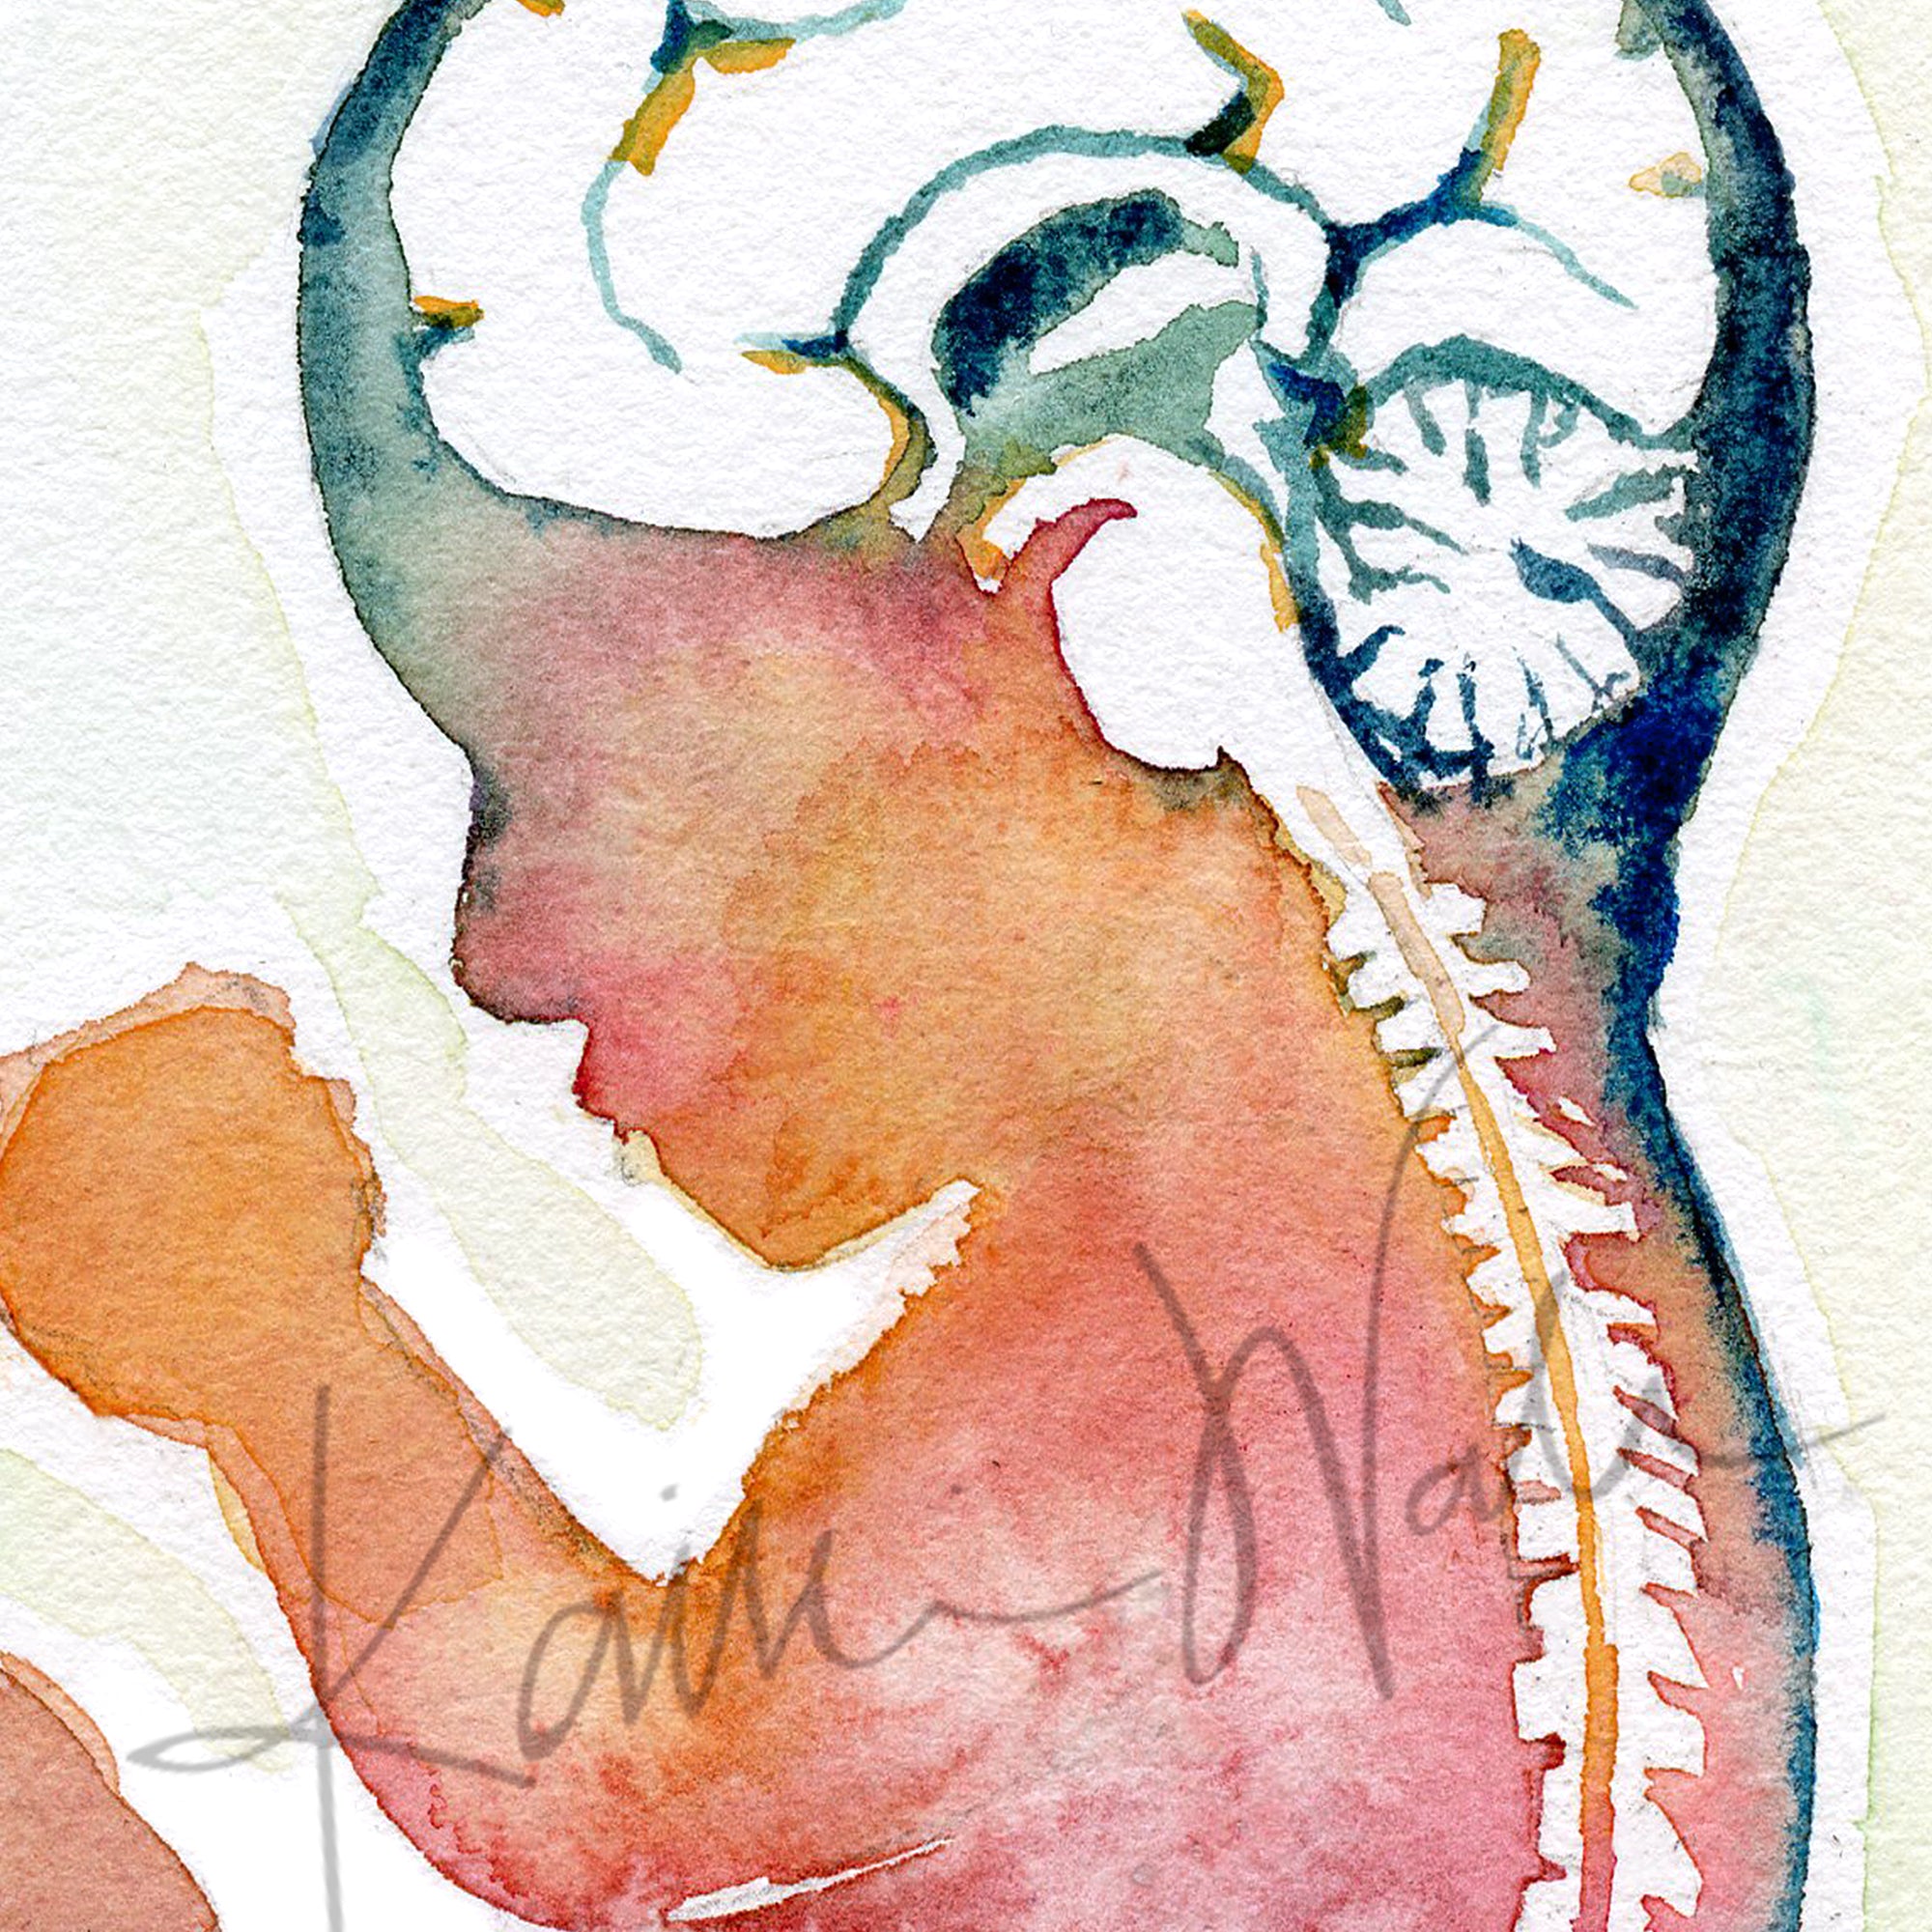 Zoomed in view of a watercolor painting of a fetus showing the spine and brain in rainbow colors.